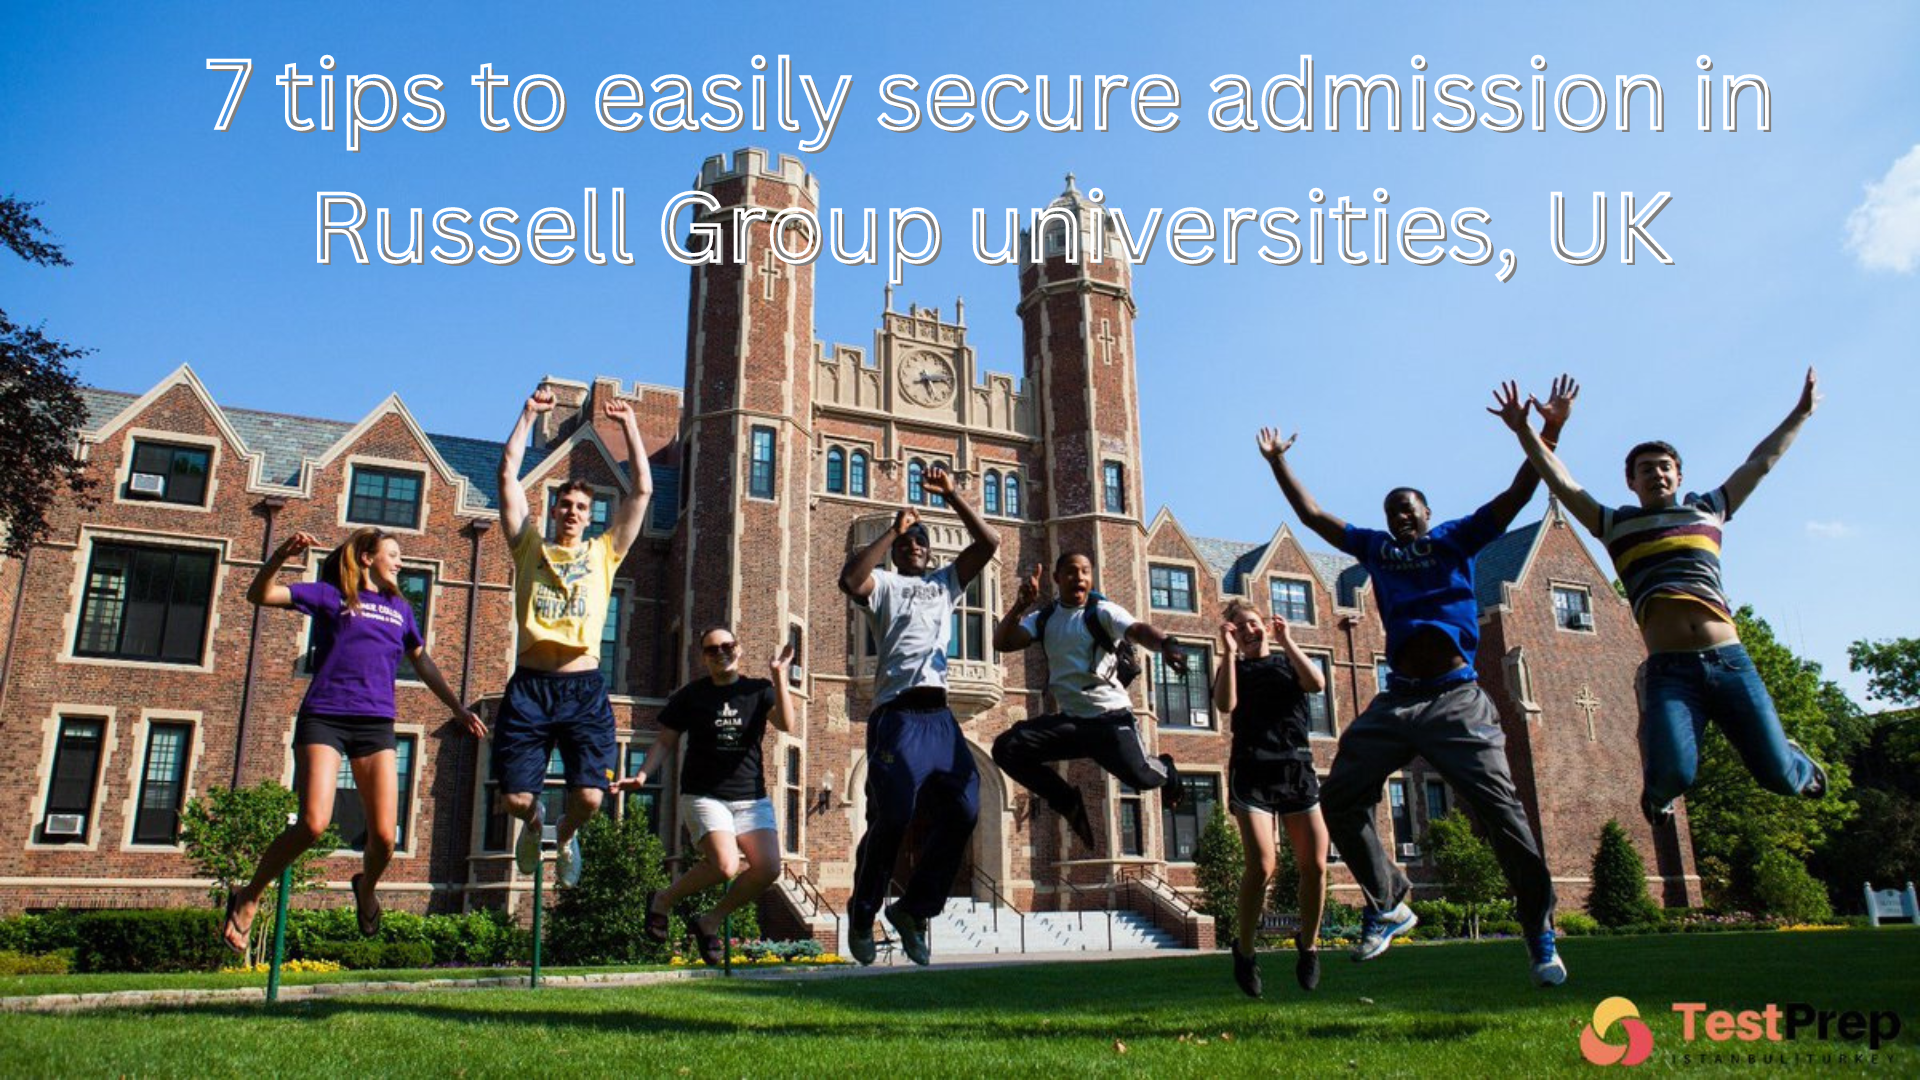 7 tips to easily secure admission in Russell Group universities, UK by personal statement uk